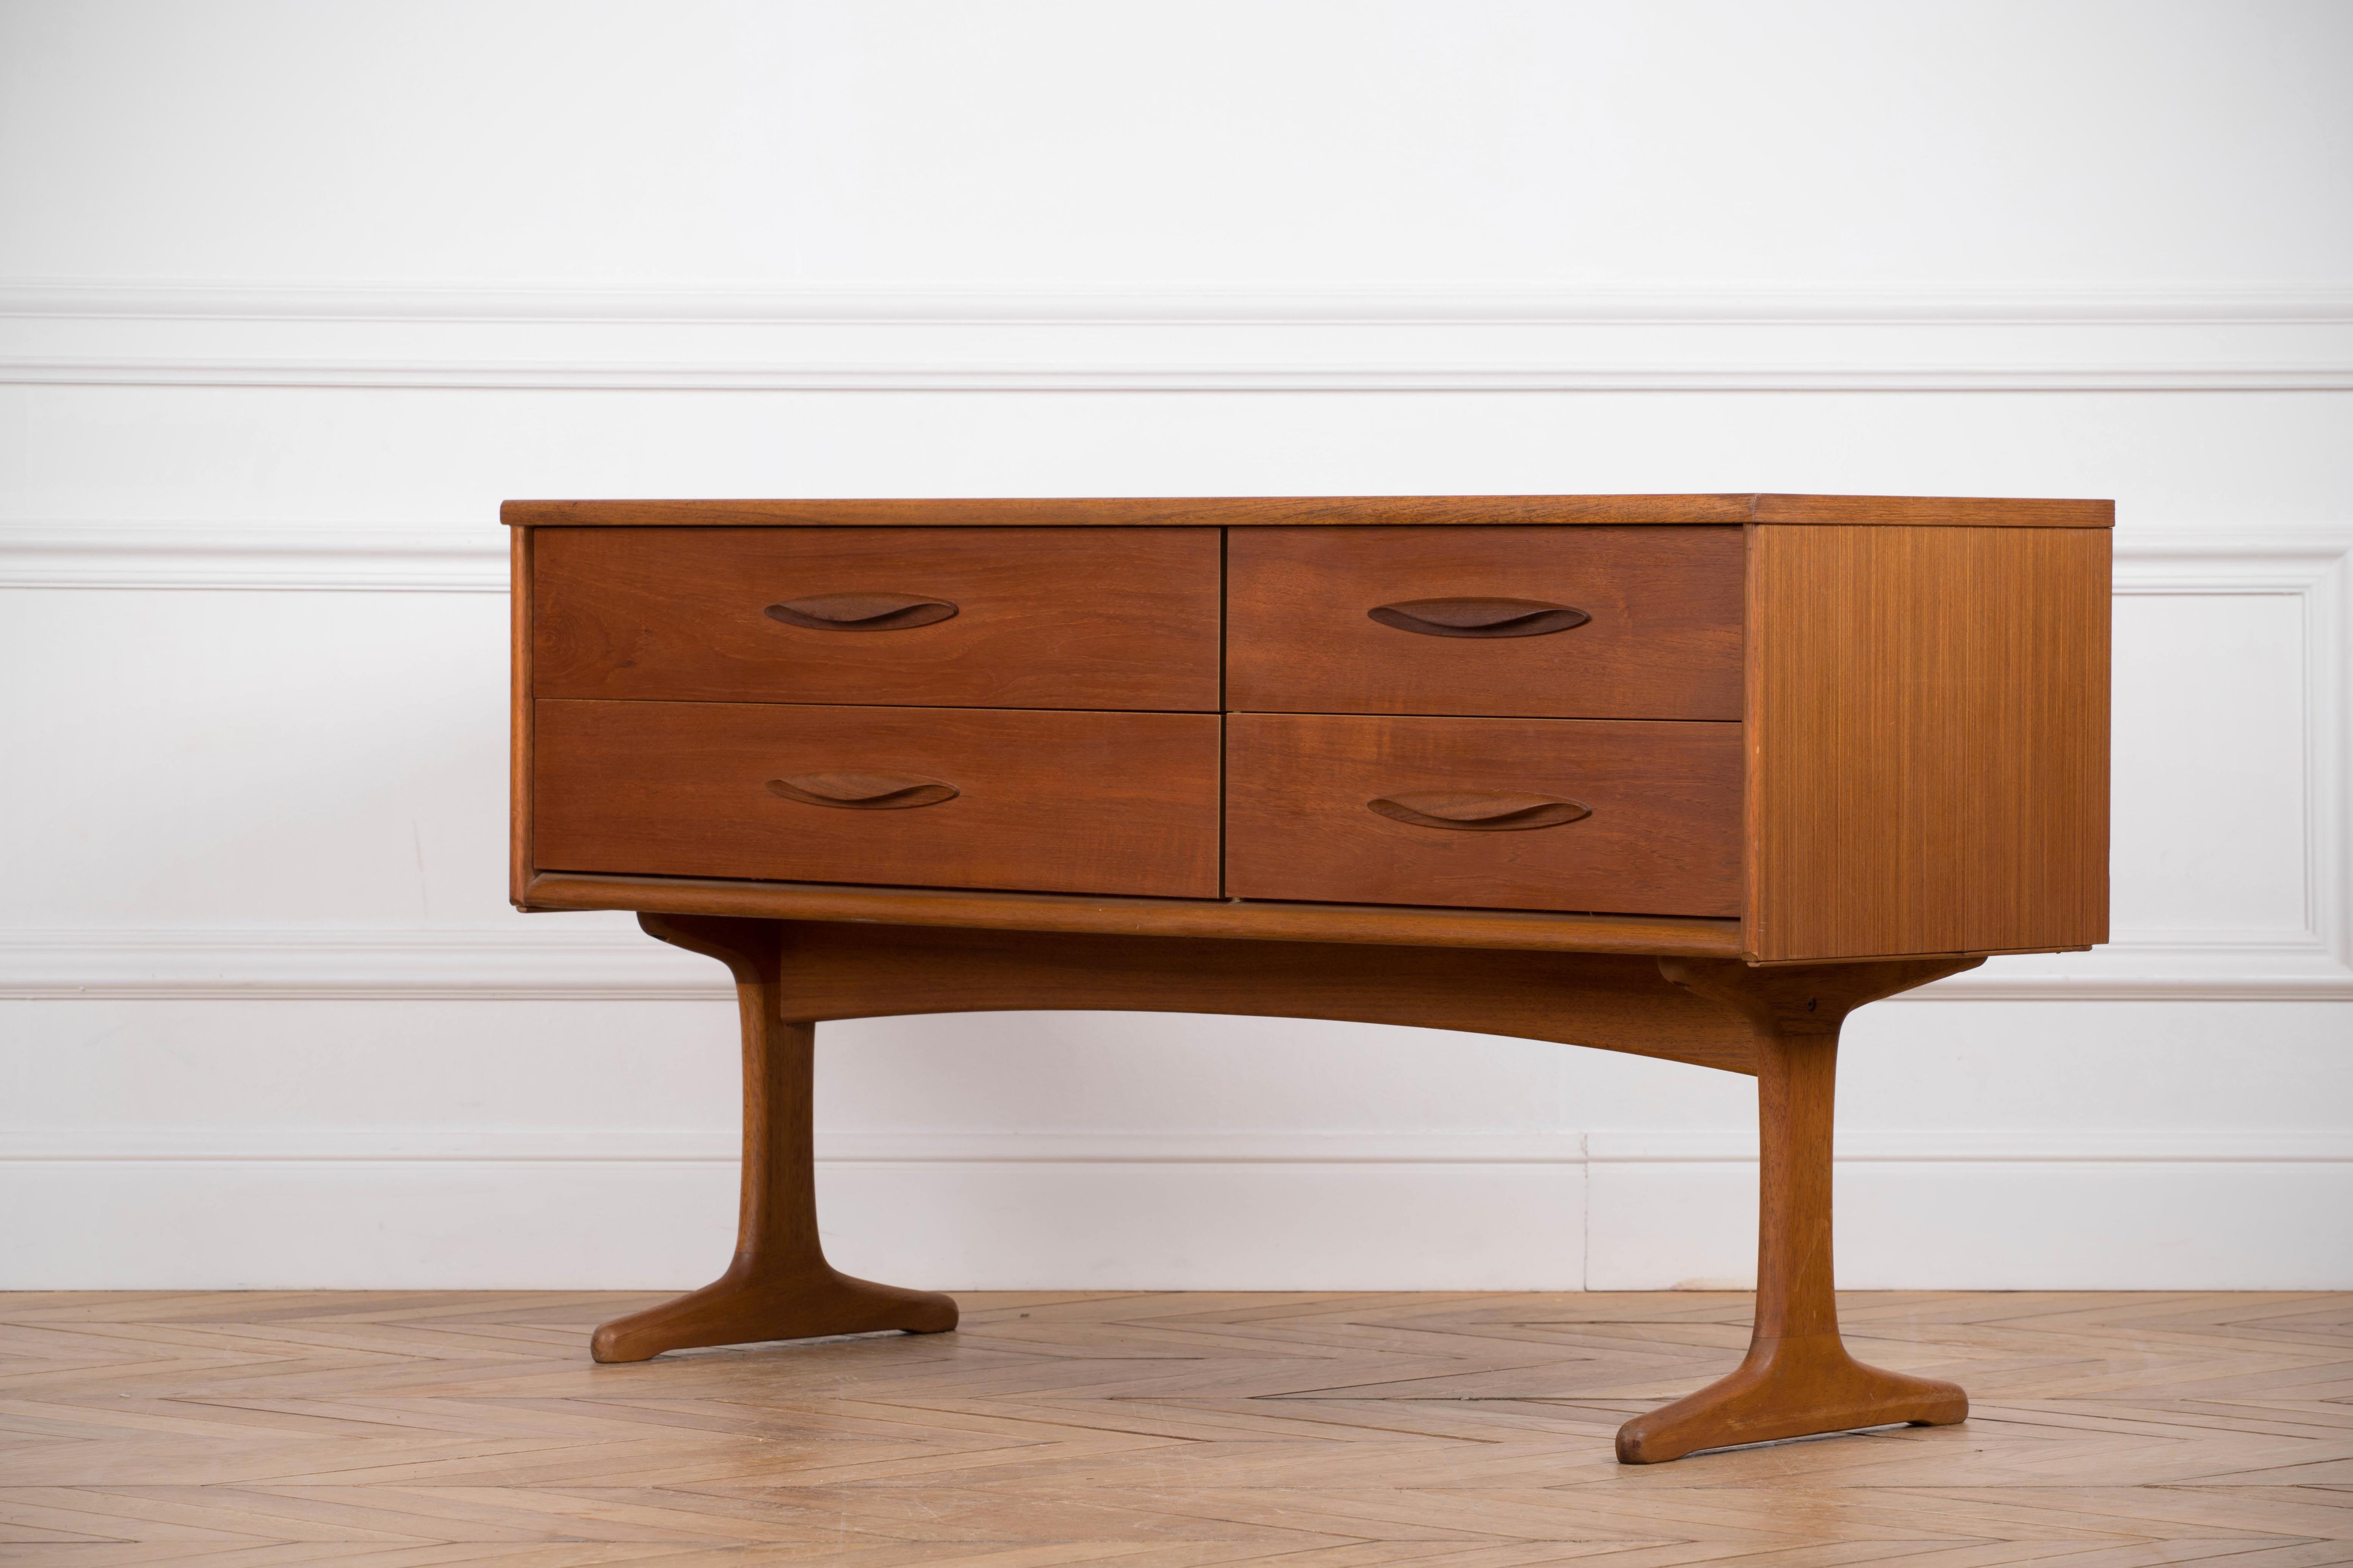 British Mid-20th Century Teak Sideboard Designed by Frank Guille